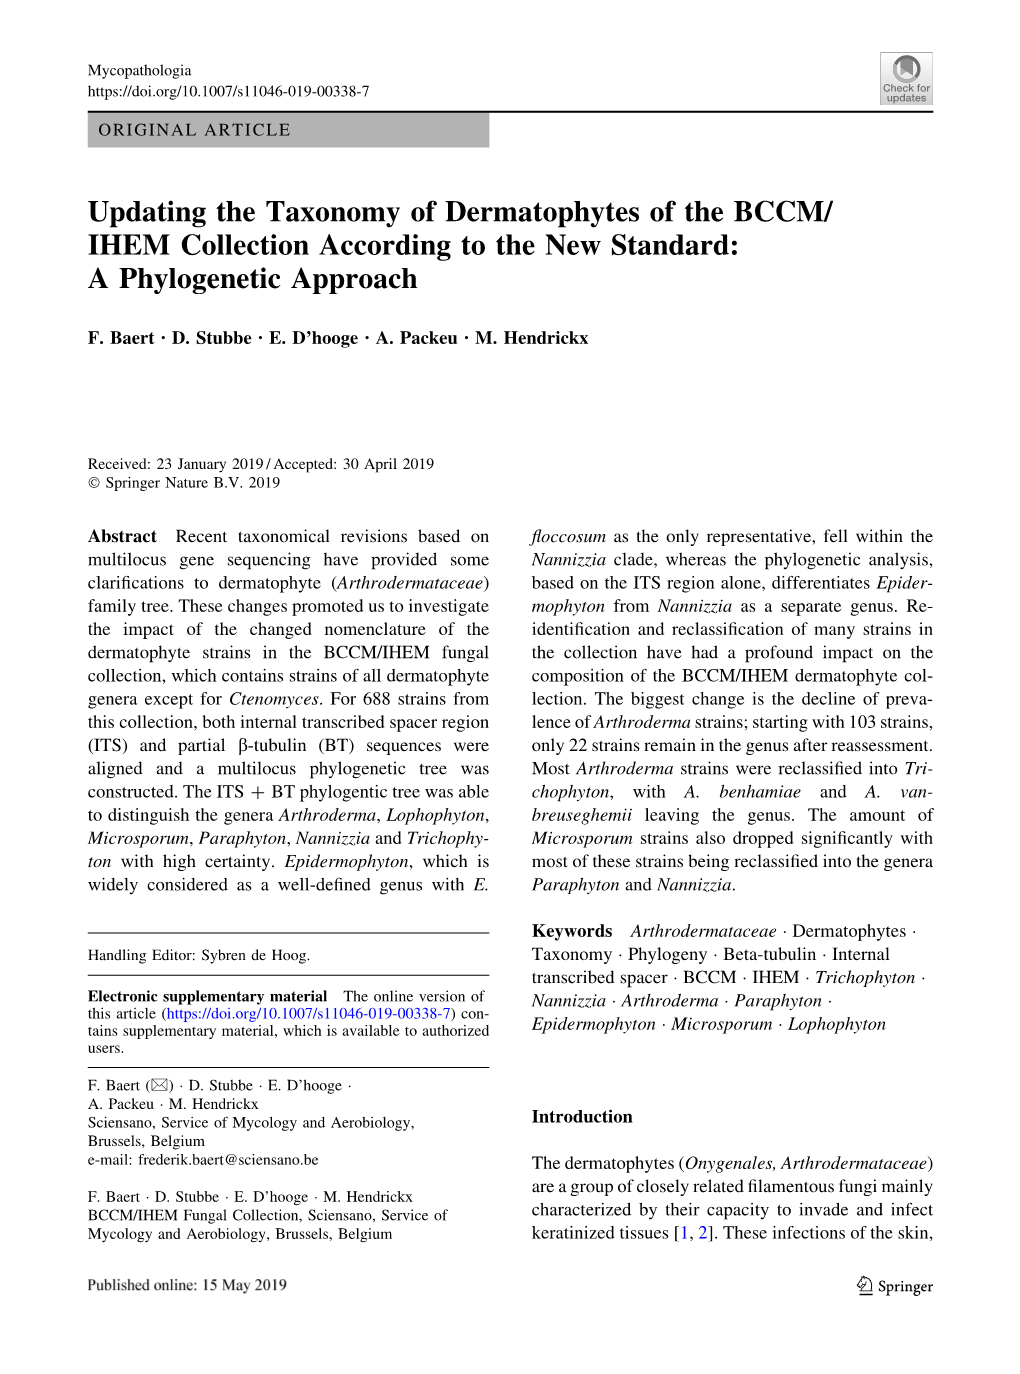 Updating the Taxonomy of Dermatophytes of the BCCM/ IHEM Collection According to the New Standard: a Phylogenetic Approach